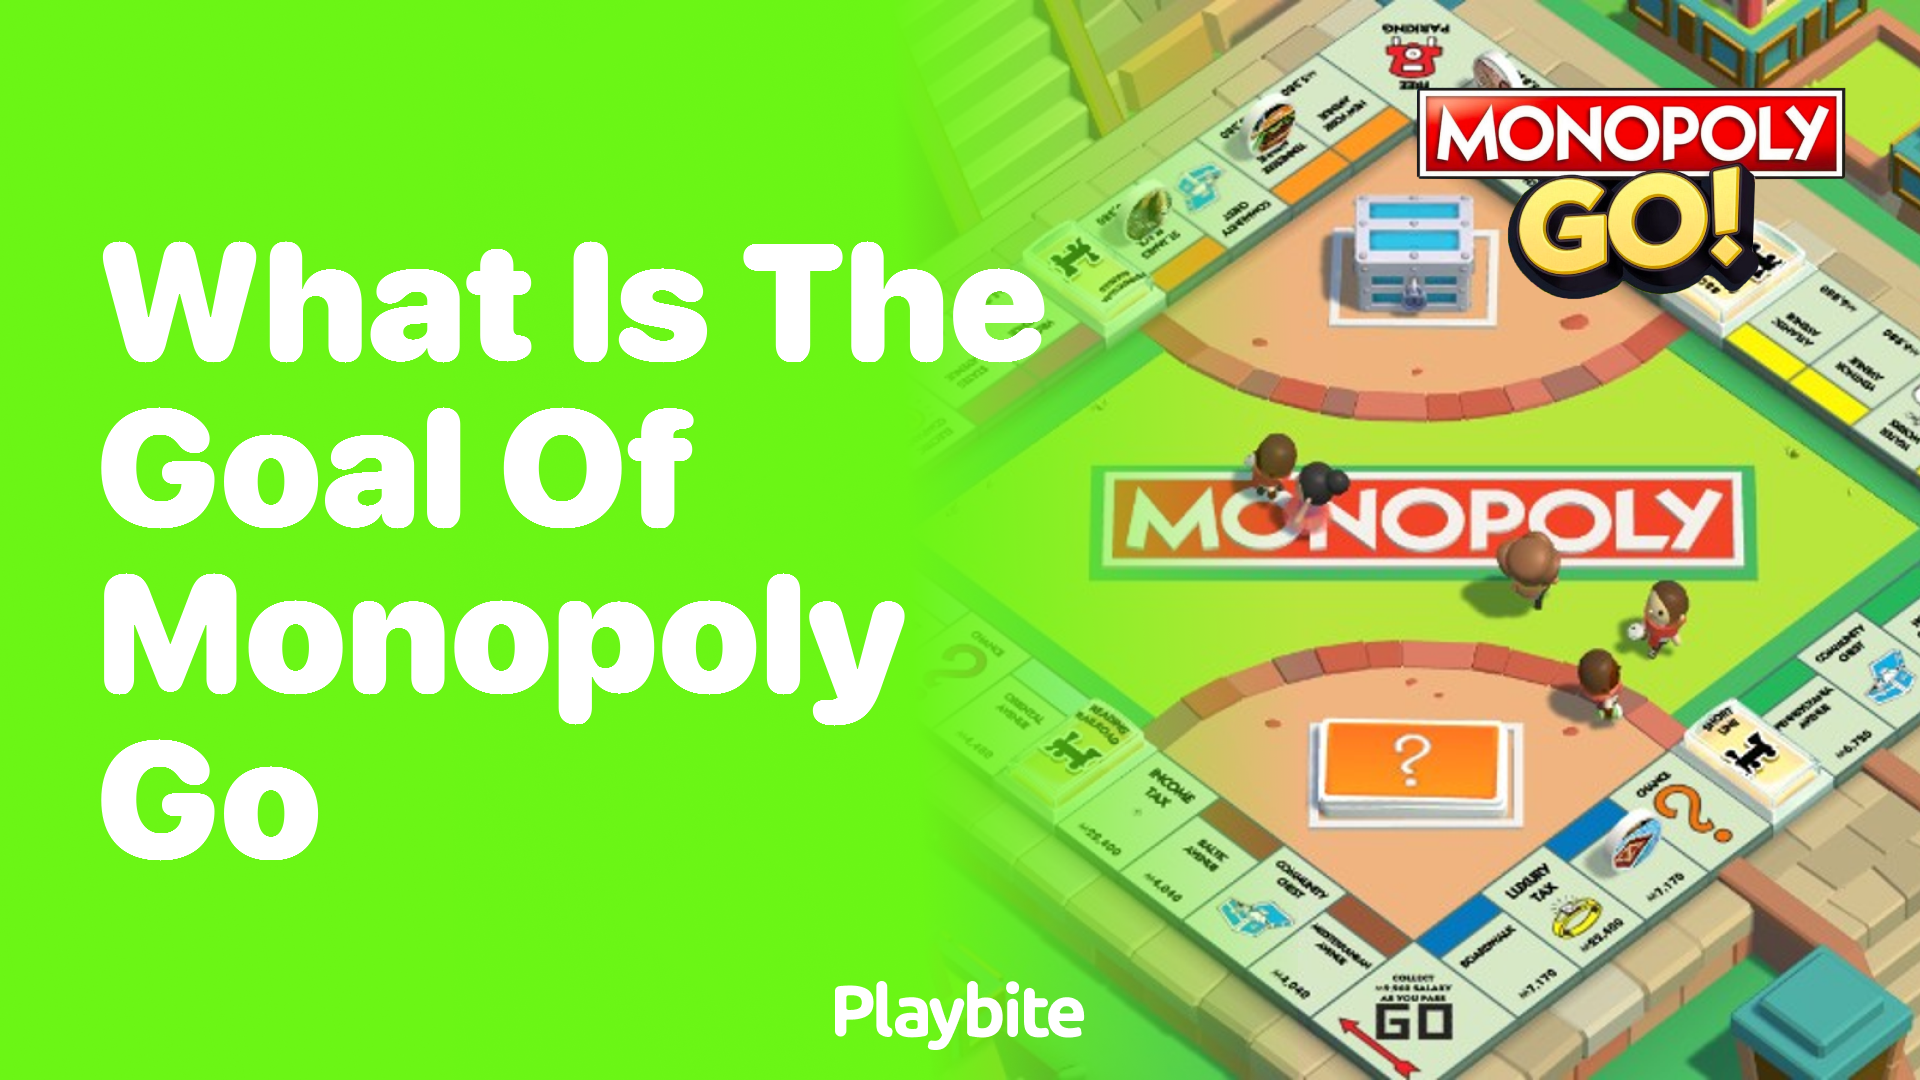 What Is the Goal of Monopoly Go?